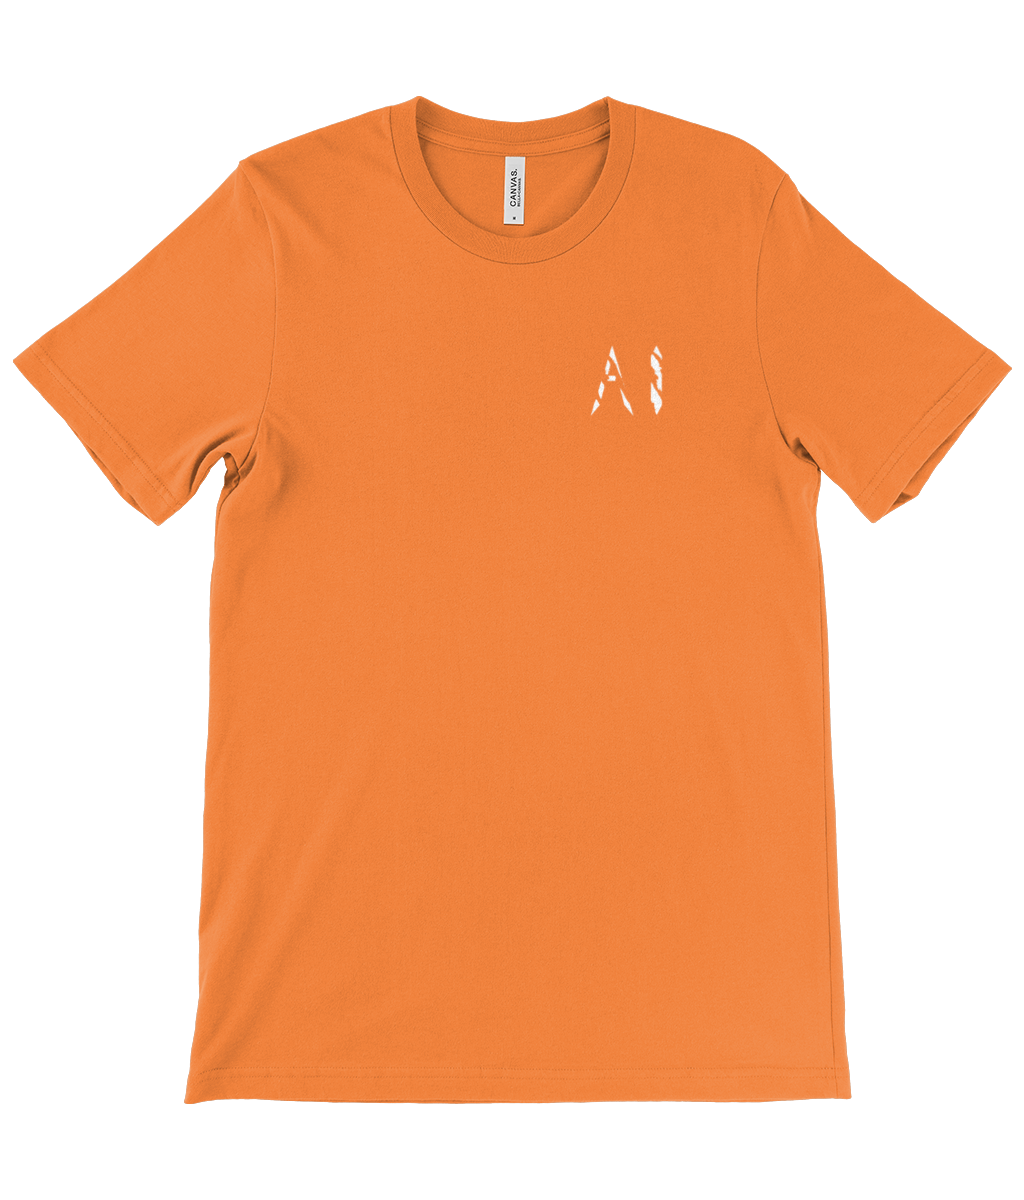 Mens orange Casual T-Shirt with white logo on the left chest